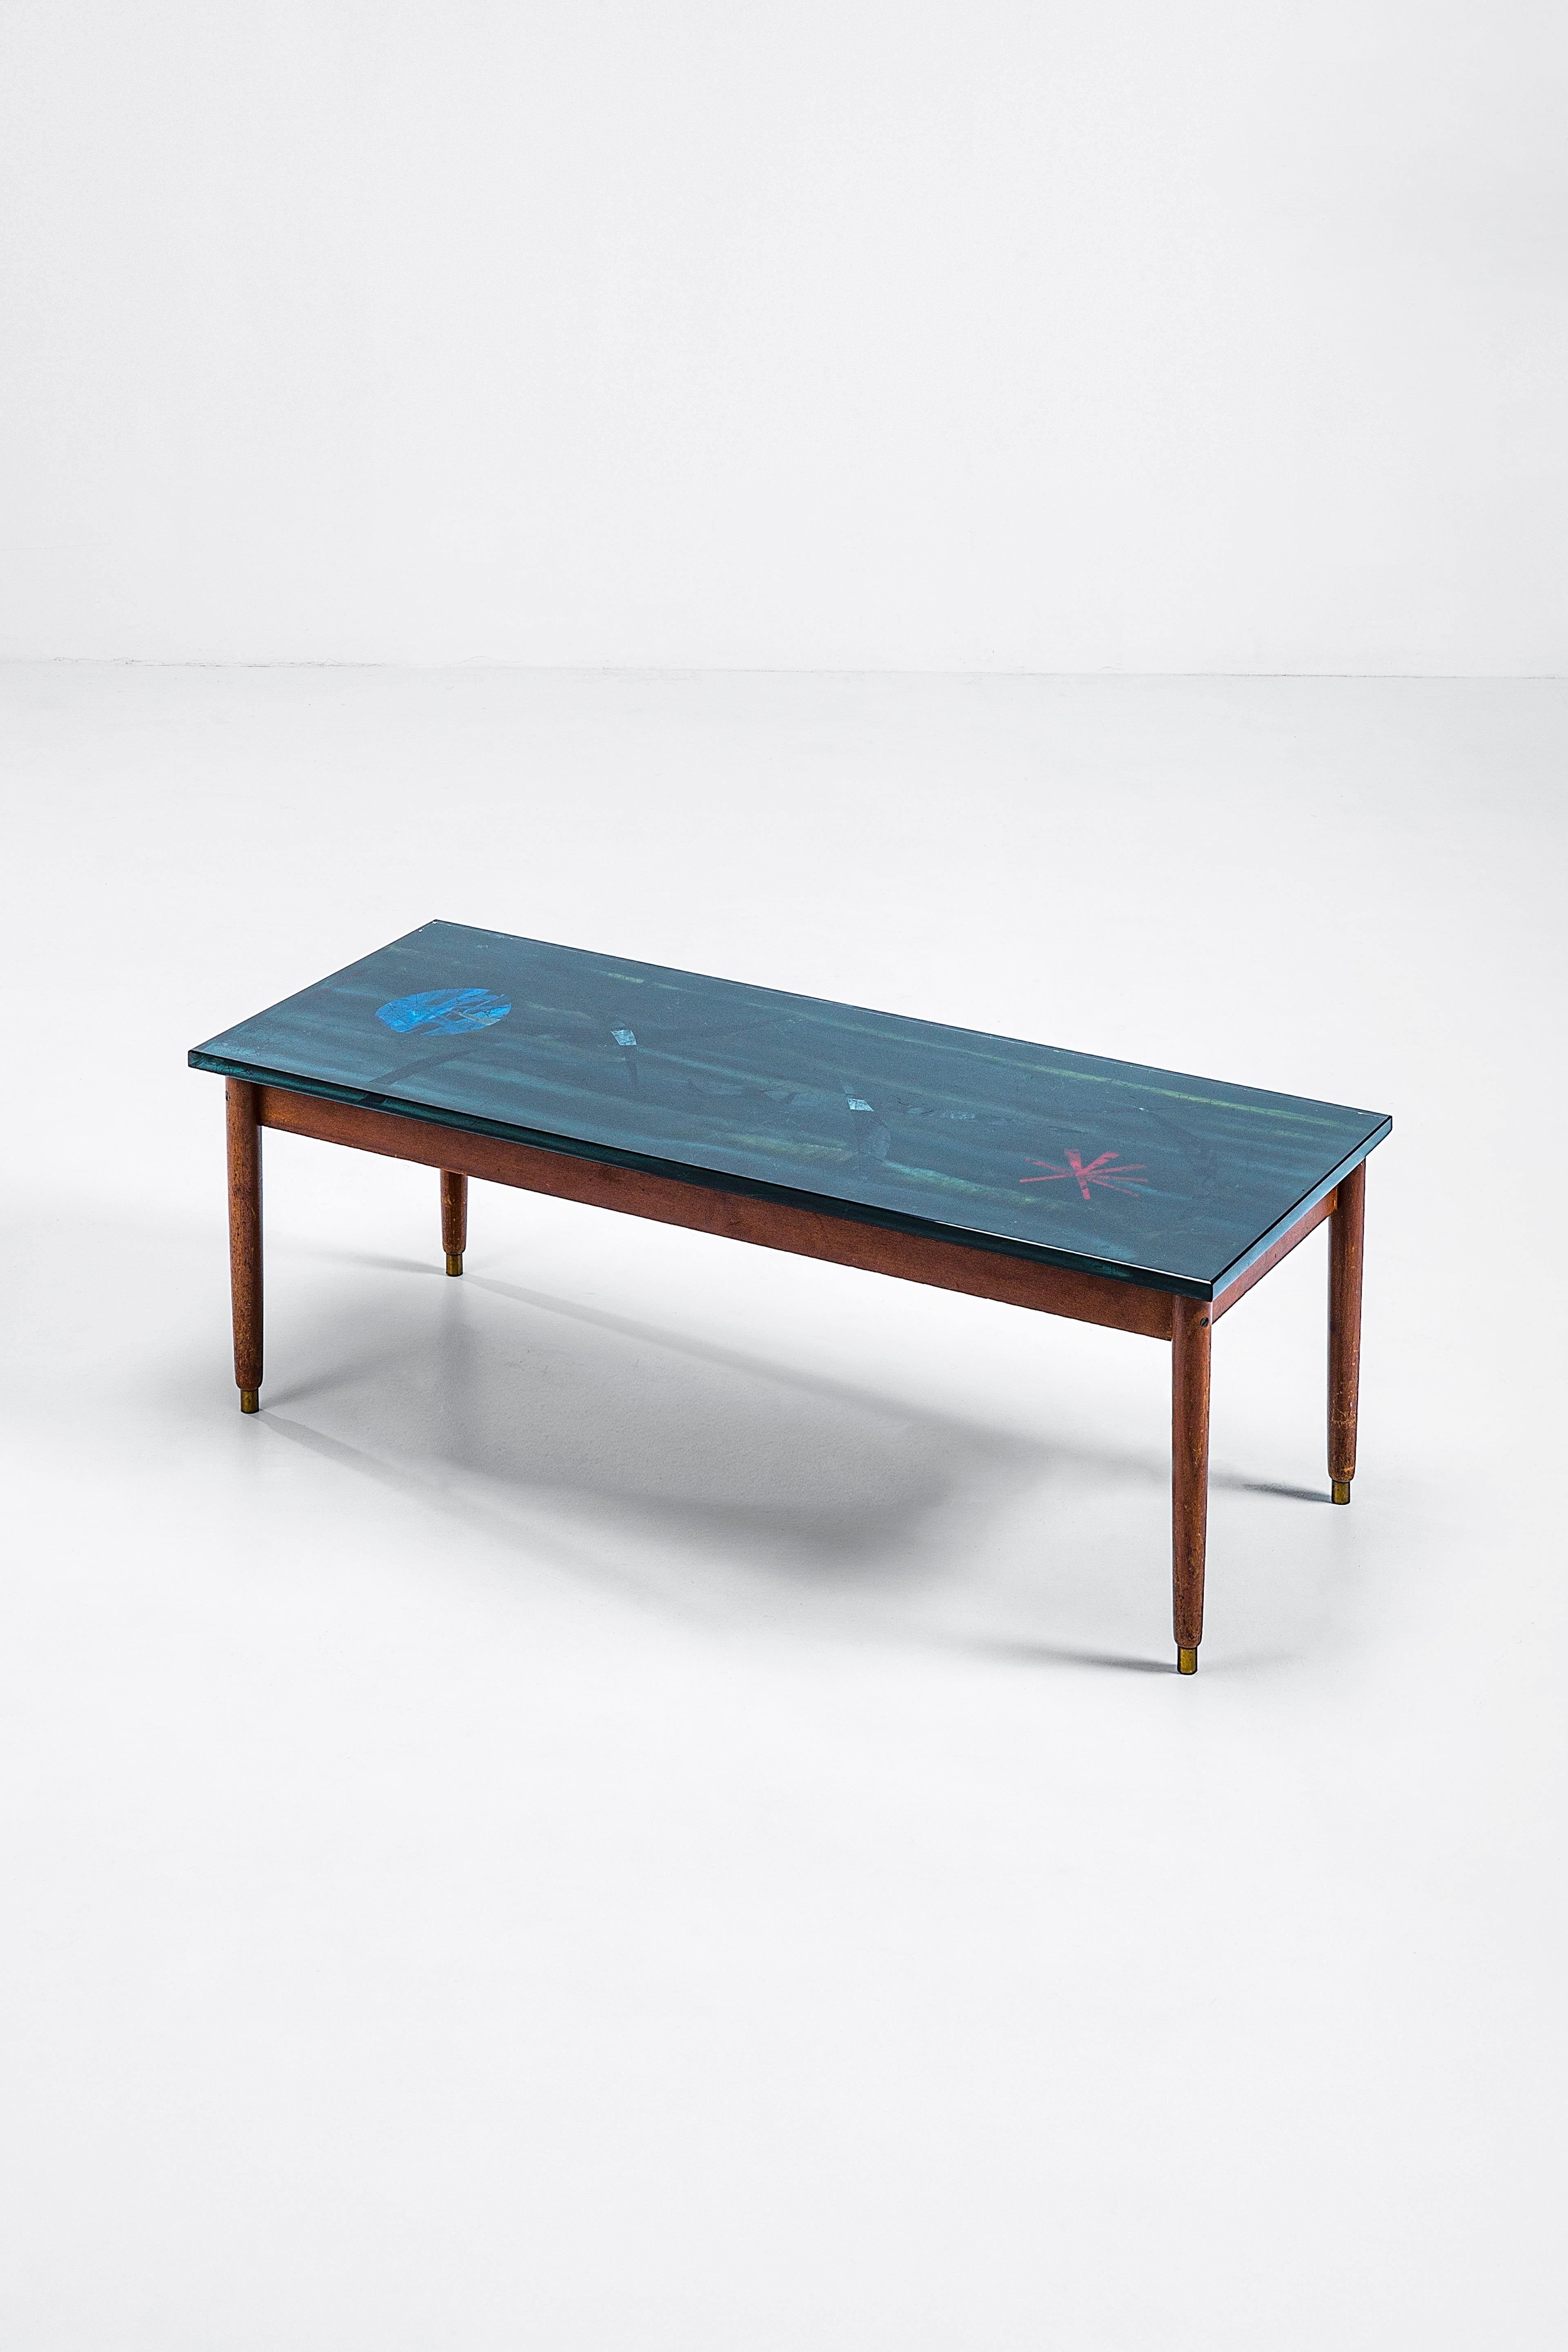 Duilio Bernabè known as Dubè was an artist who worked for Fontana Arte, among others, employing the eglomizing technique to decorate the painted back of glass panels and small tables. The distinctive asterisk signature on one edge helps validate the